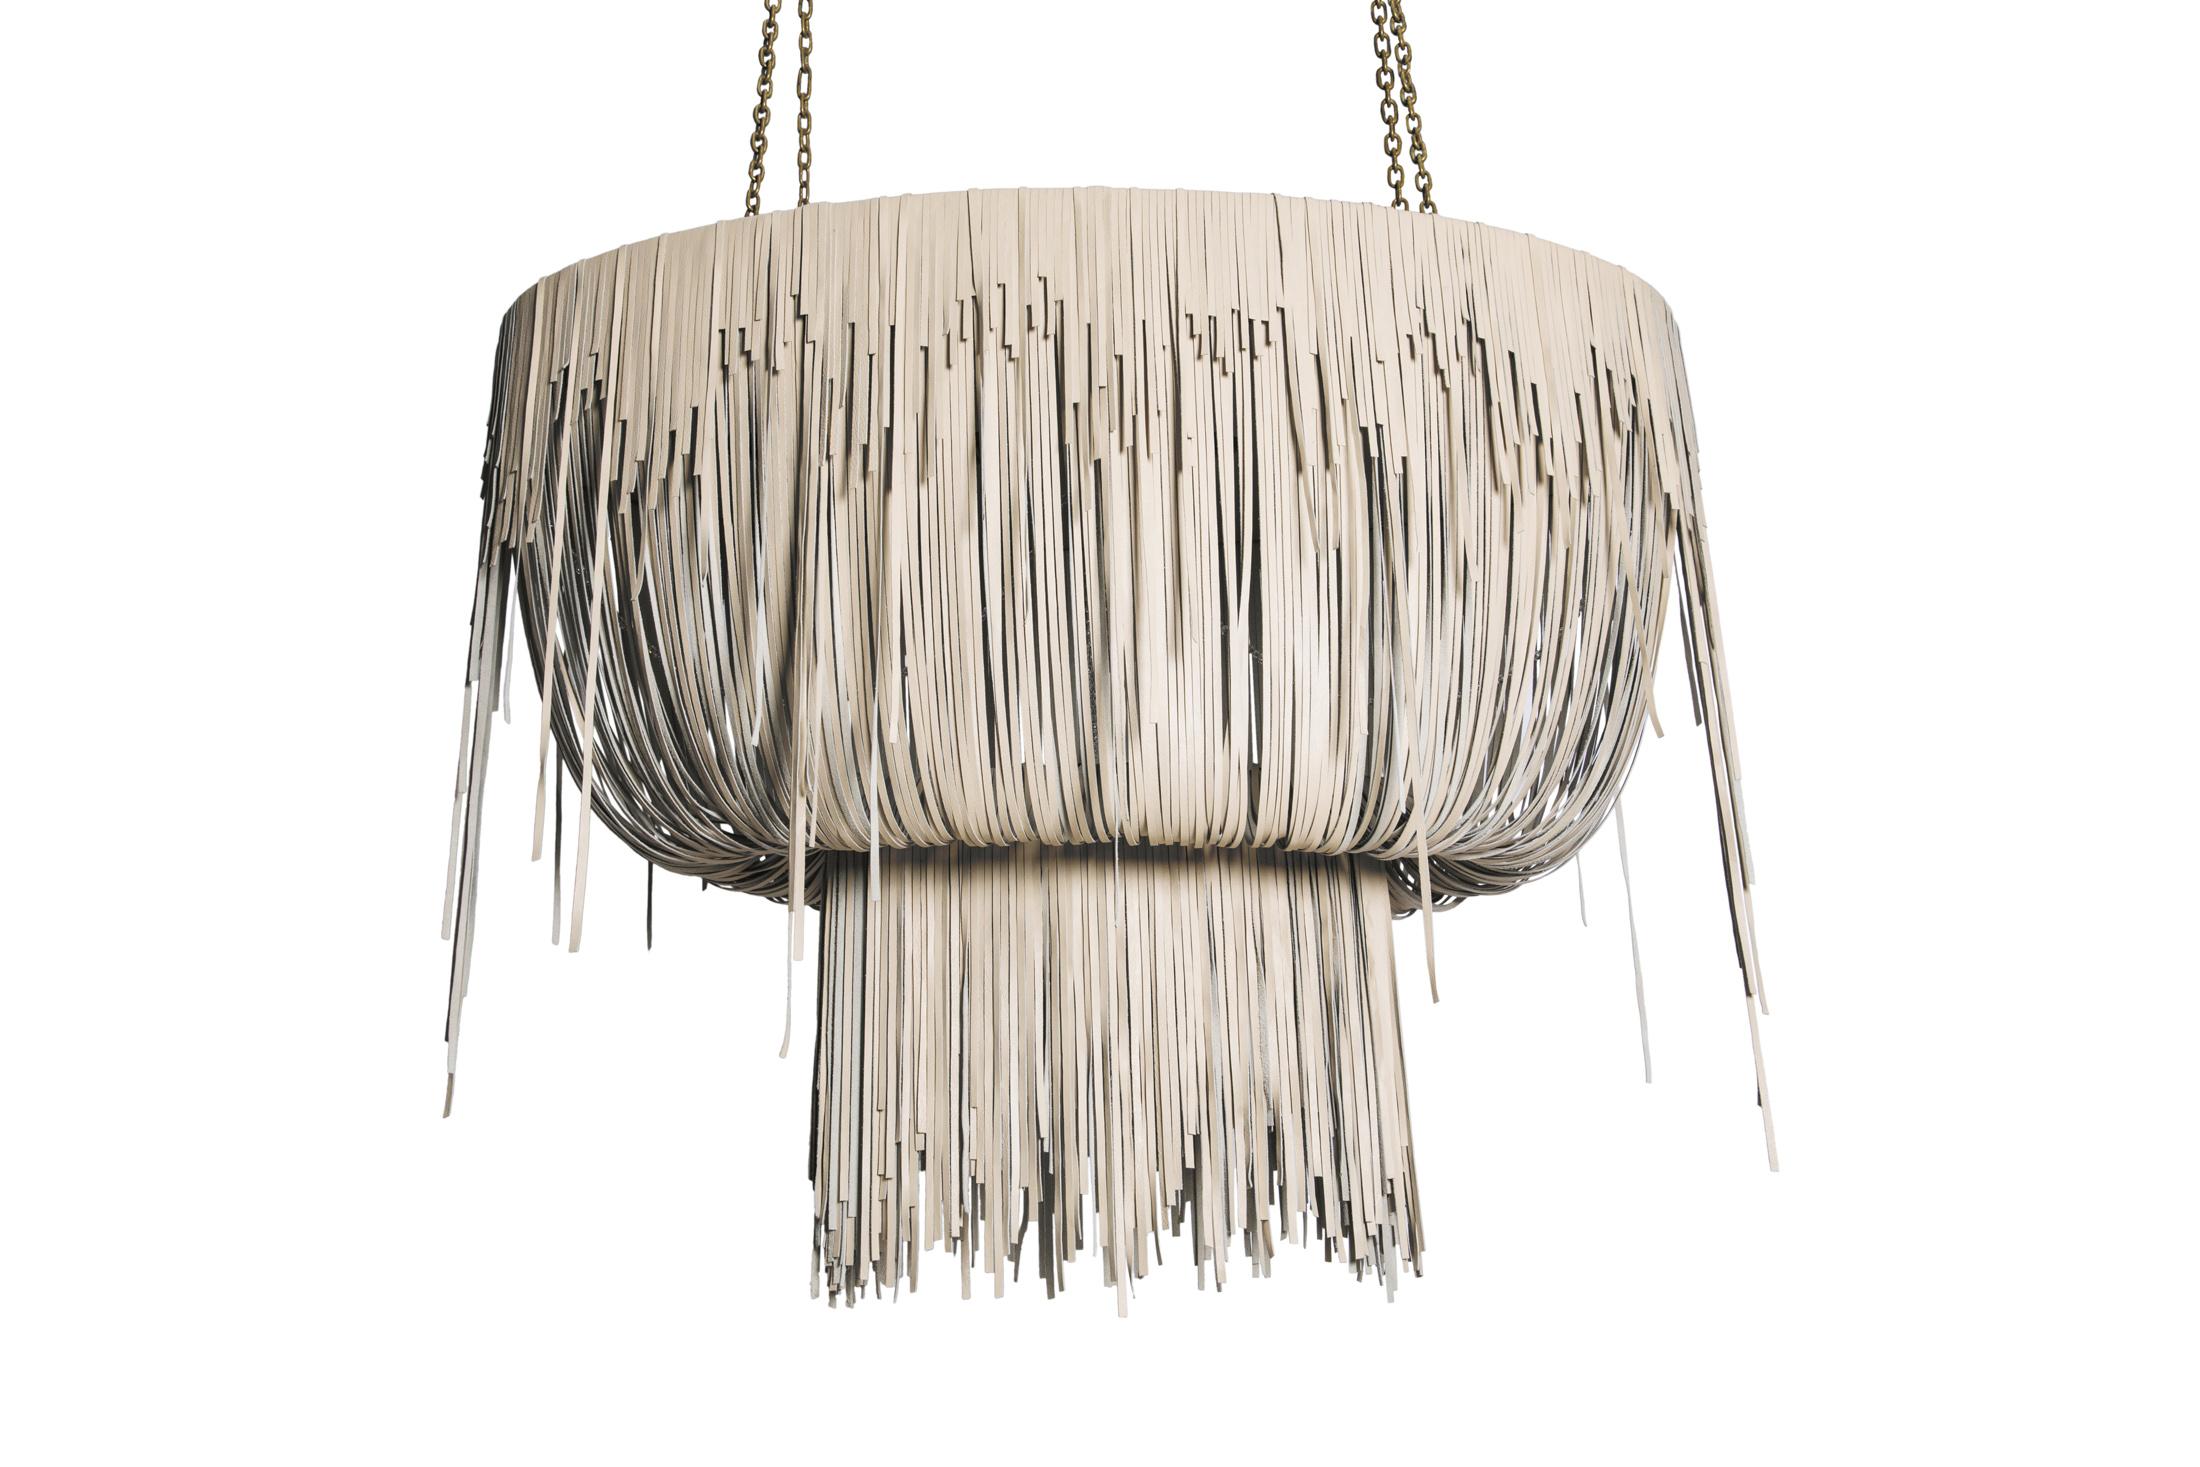 Medium Oval Urchin Leather Chandelier in Cream-Stone Leather